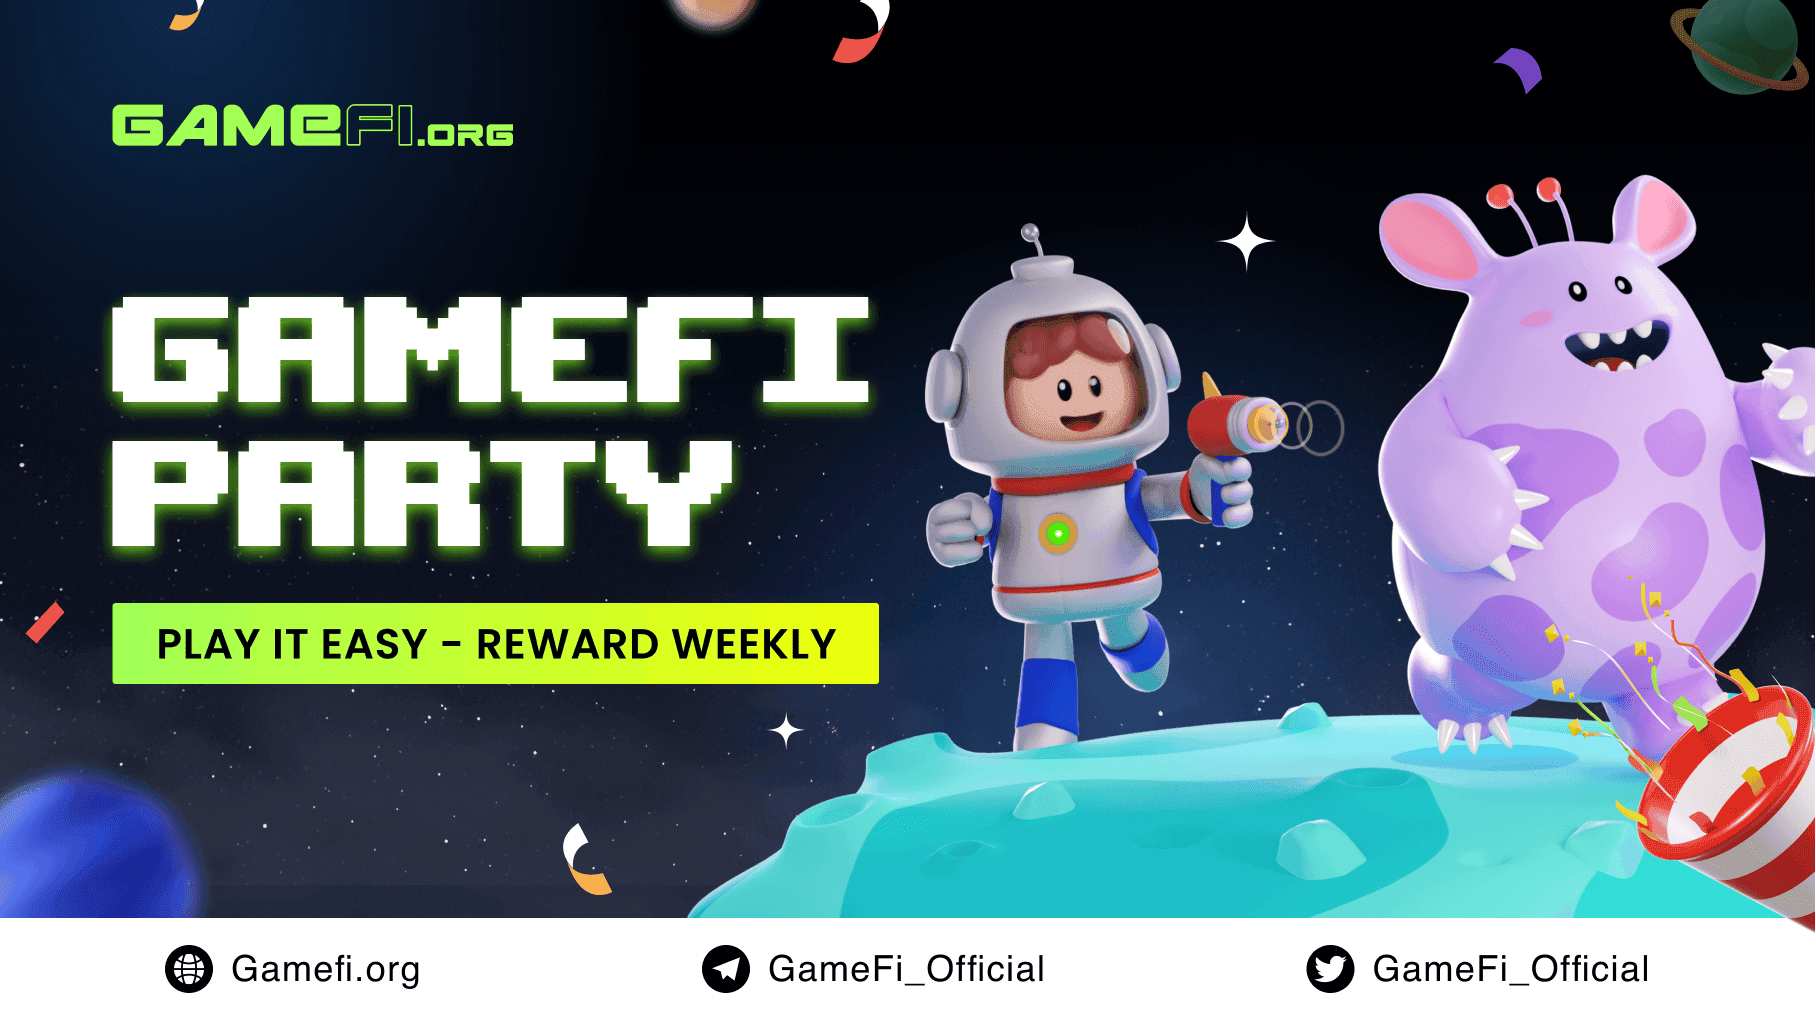 Let’s Dive Into the Game World and Win Treasures with GameFi Party